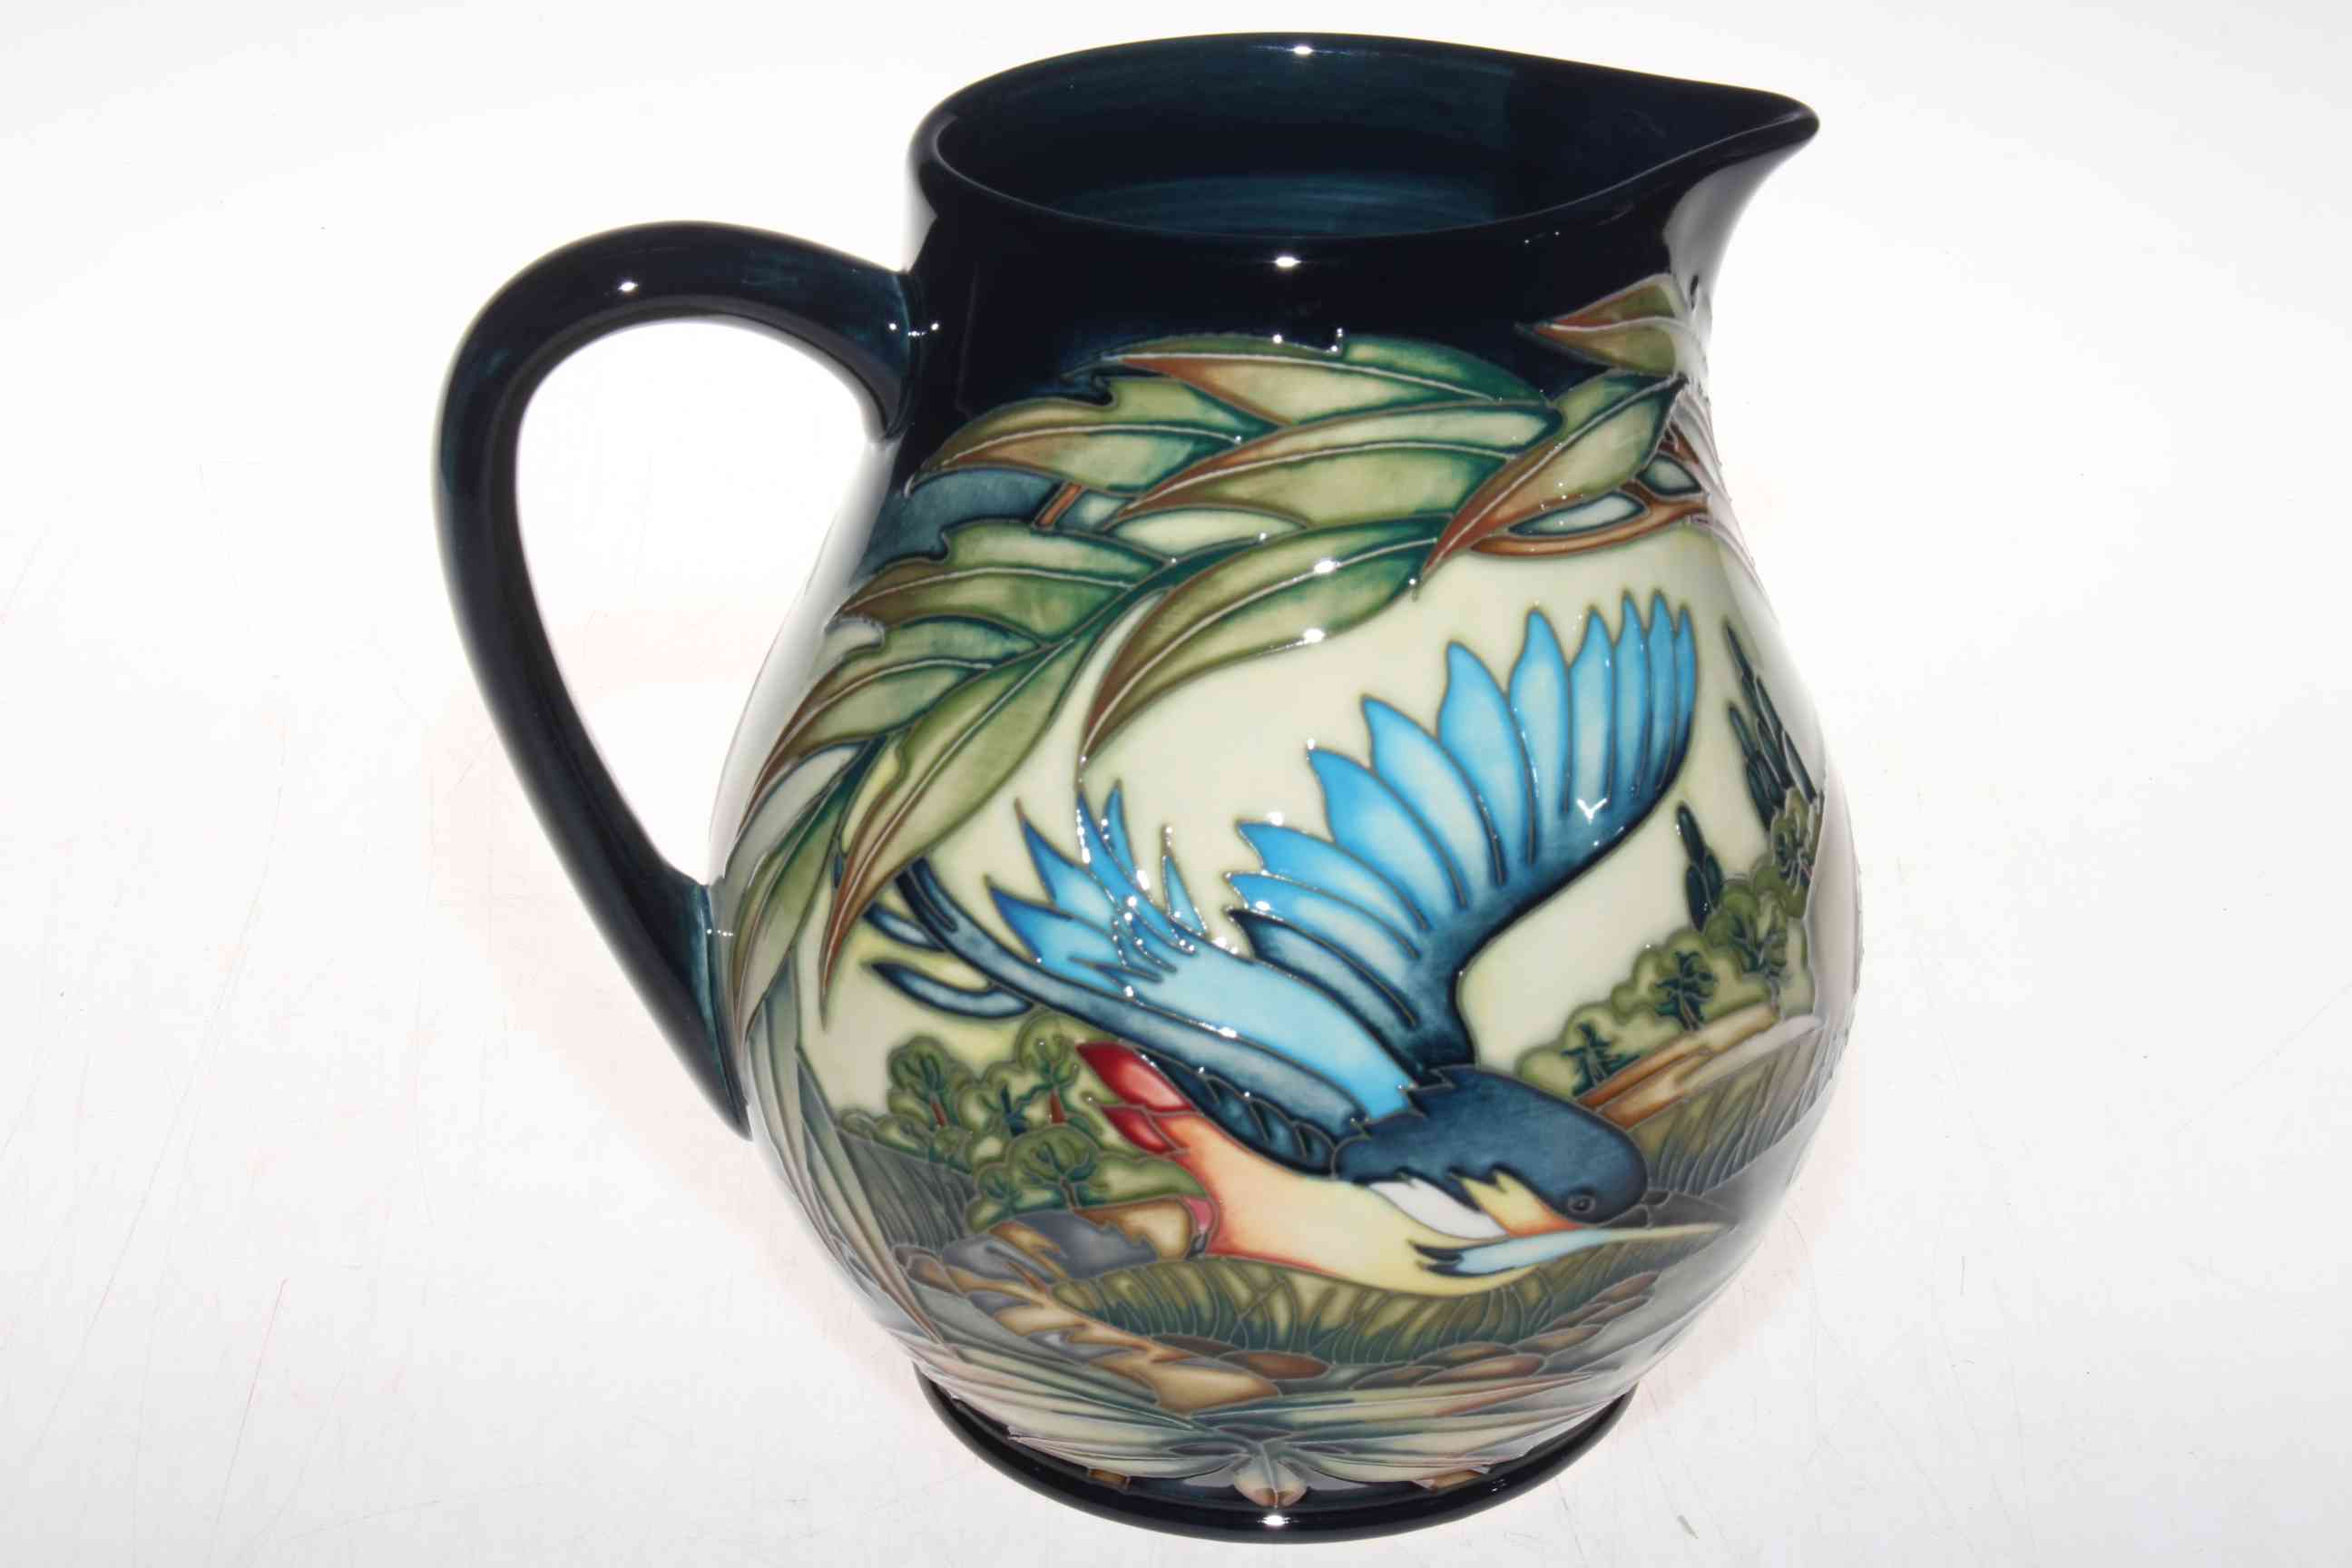 Moorcroft limited edition Kingfisher jug by Philip Gibson, 268/350, 19.5cm, with box. - Image 2 of 3